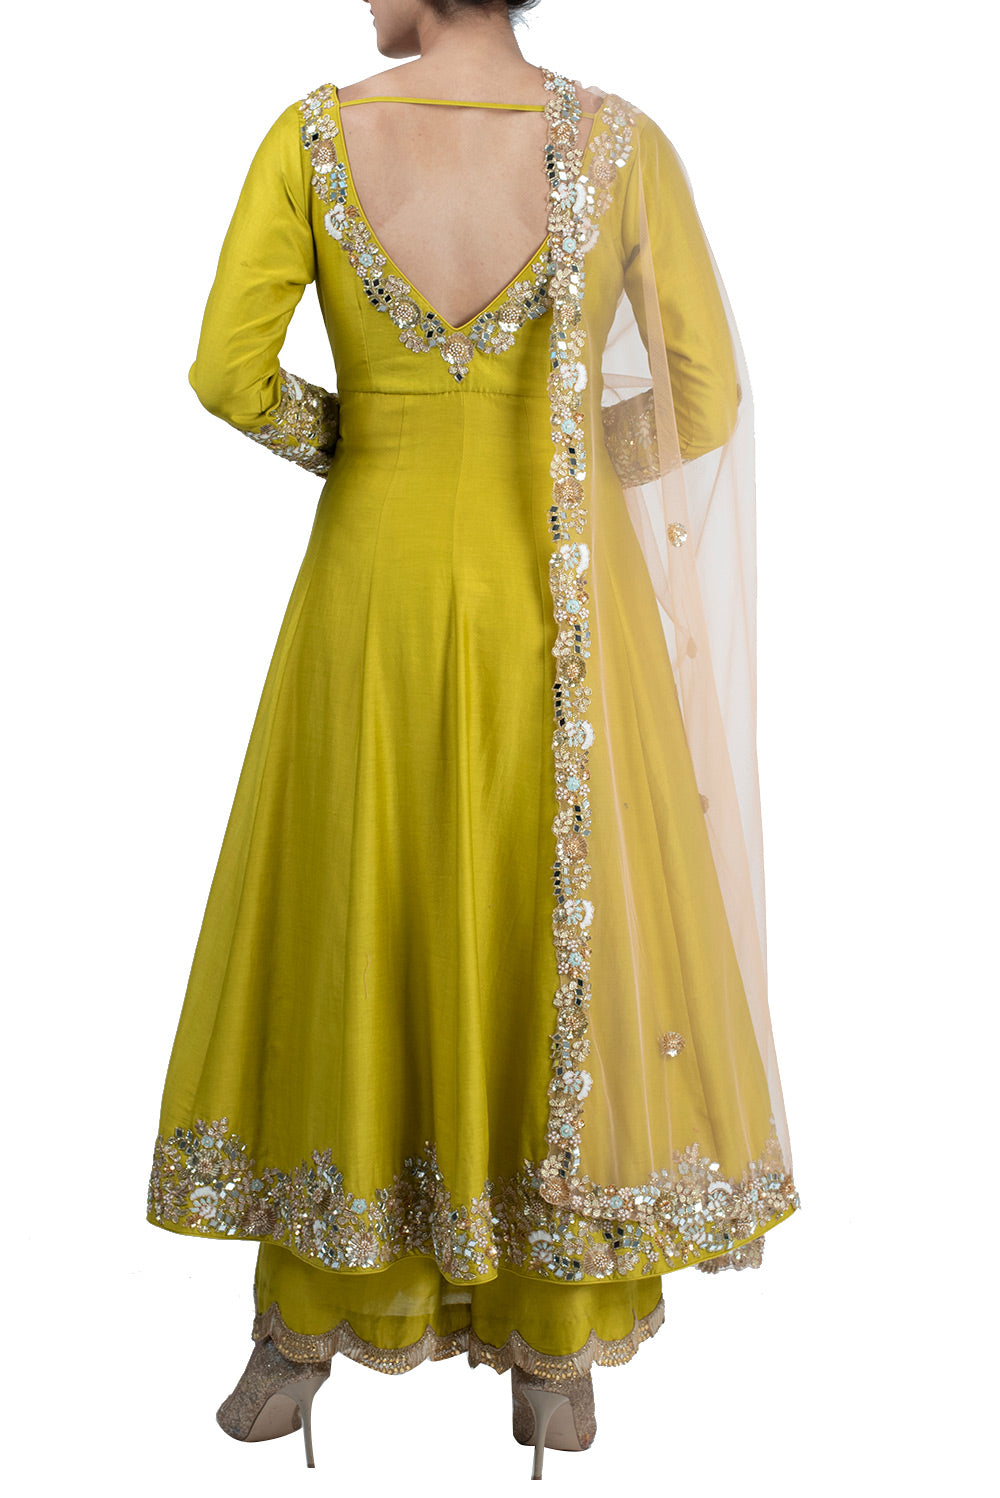 Ochre yellow hand embroidered anarkali suit - kylee